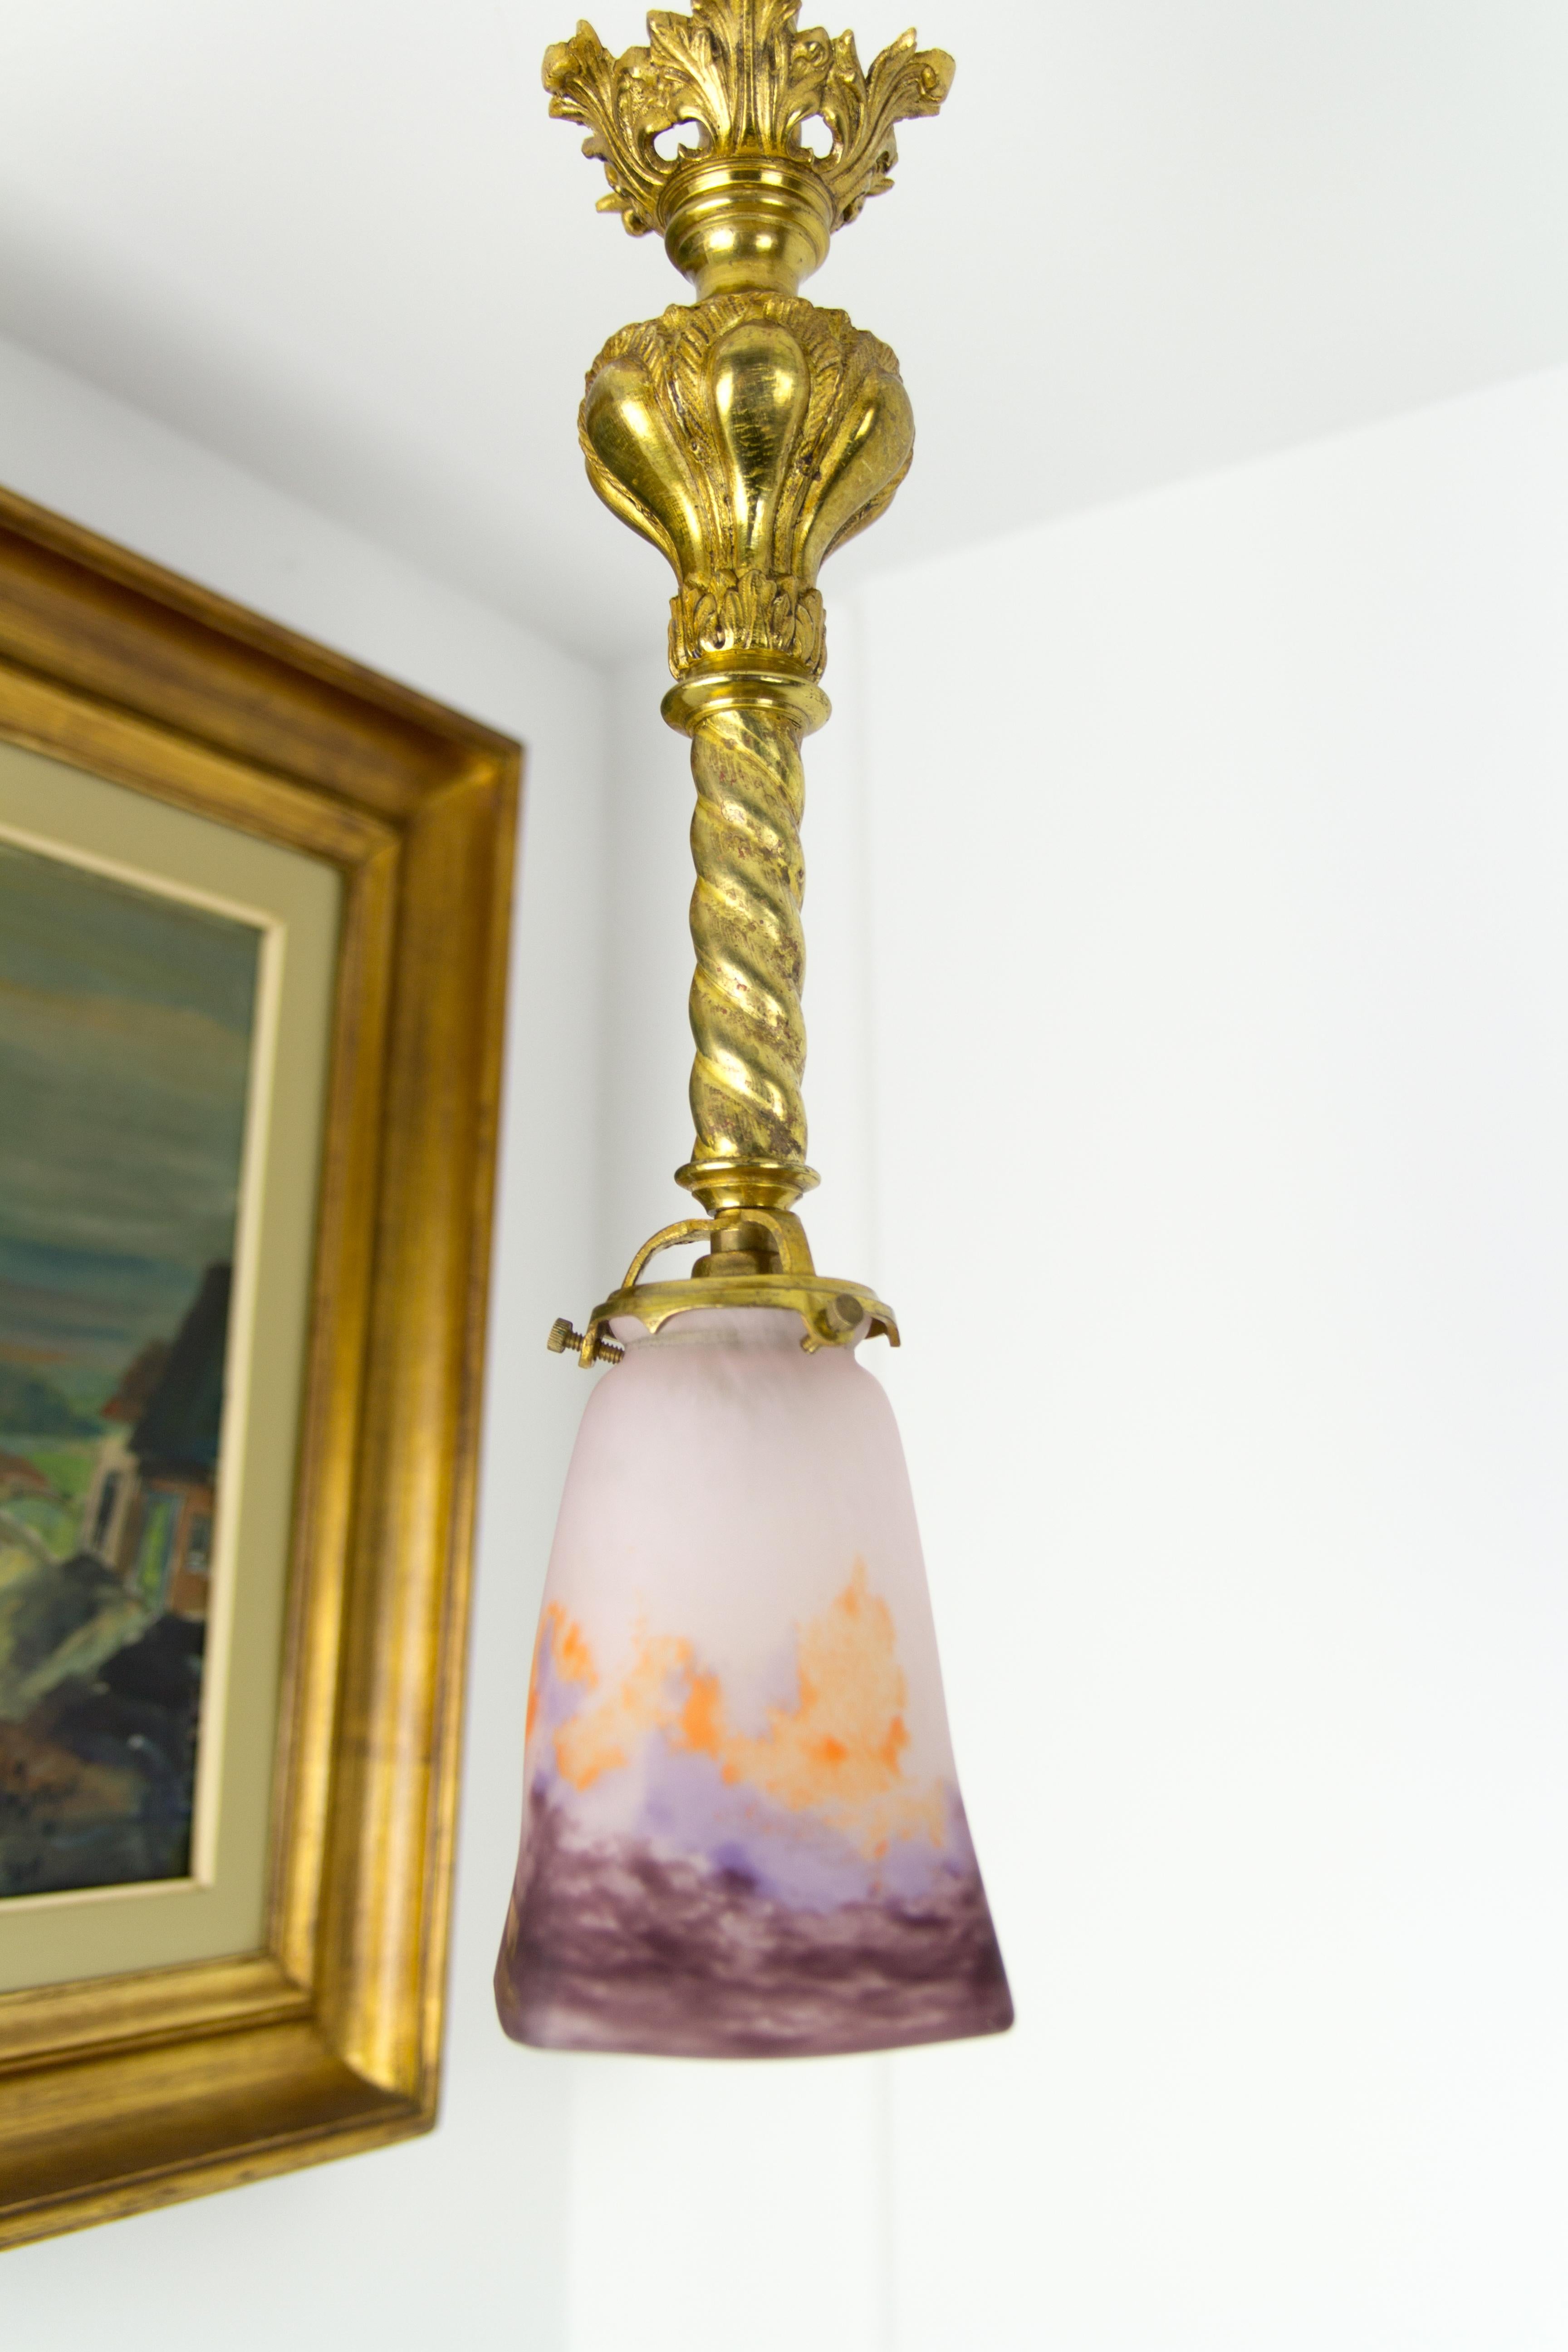 French Muller-Strasbourg Glass and Gilt Bronze Pendant Light Fixtures, a Pair For Sale 3